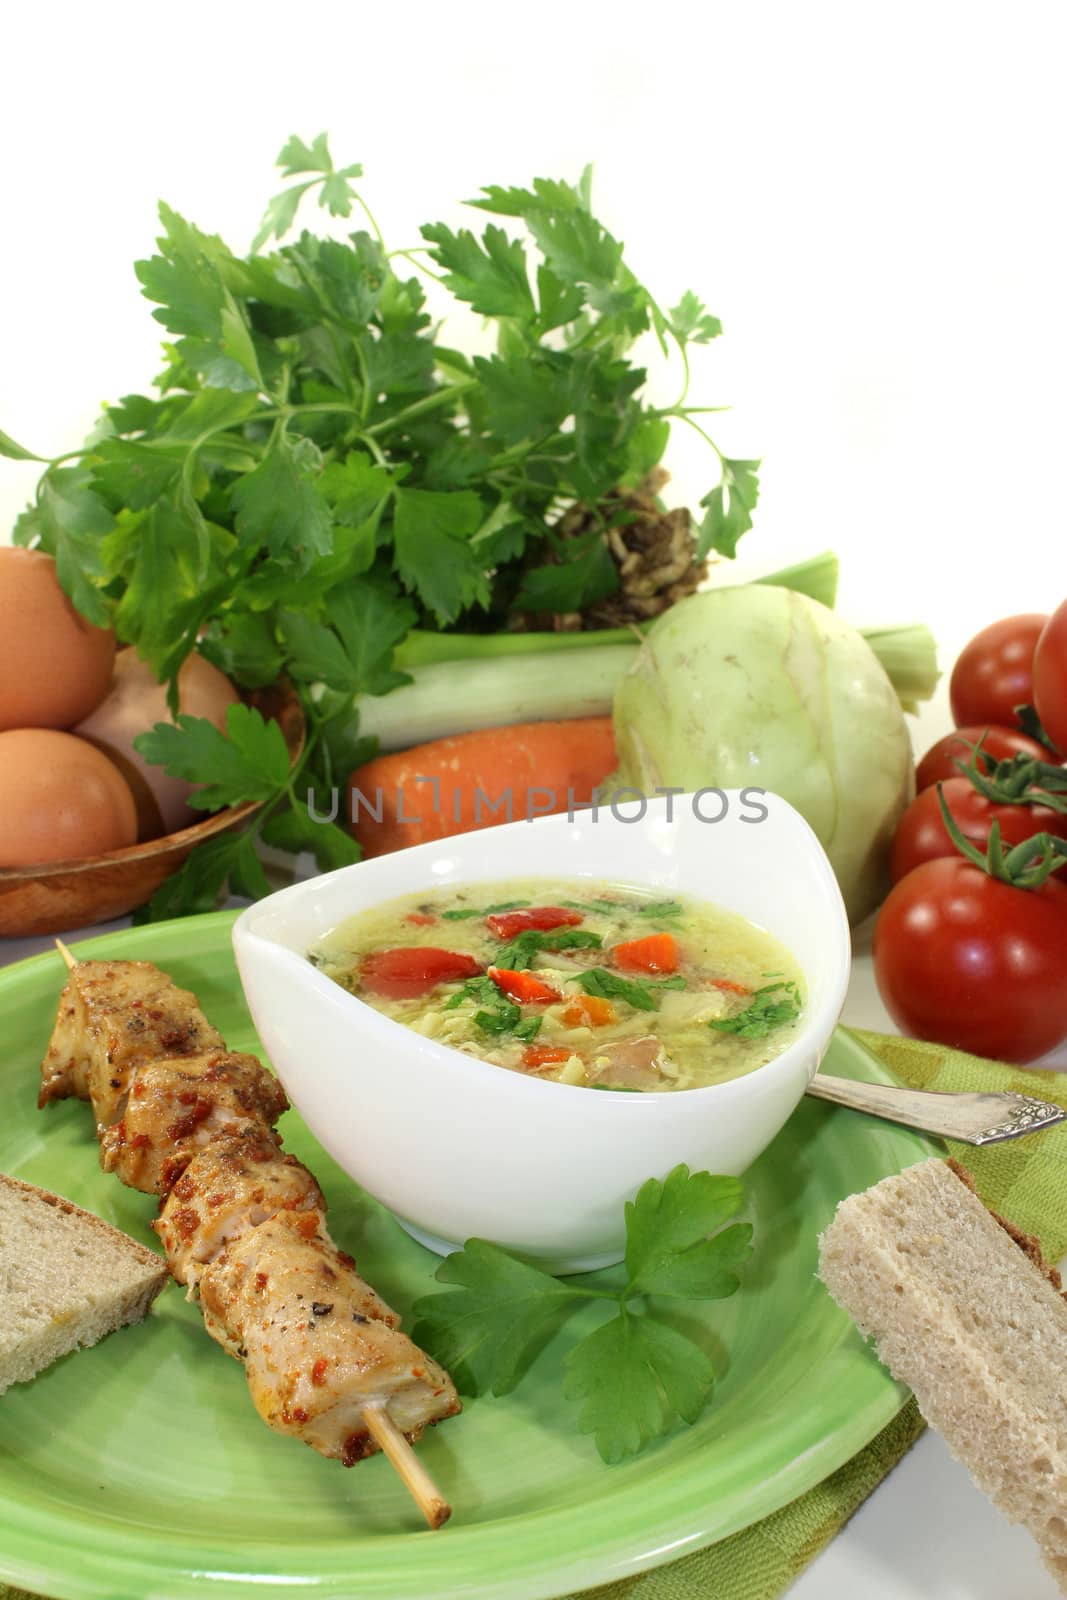 Chicken soup by silencefoto